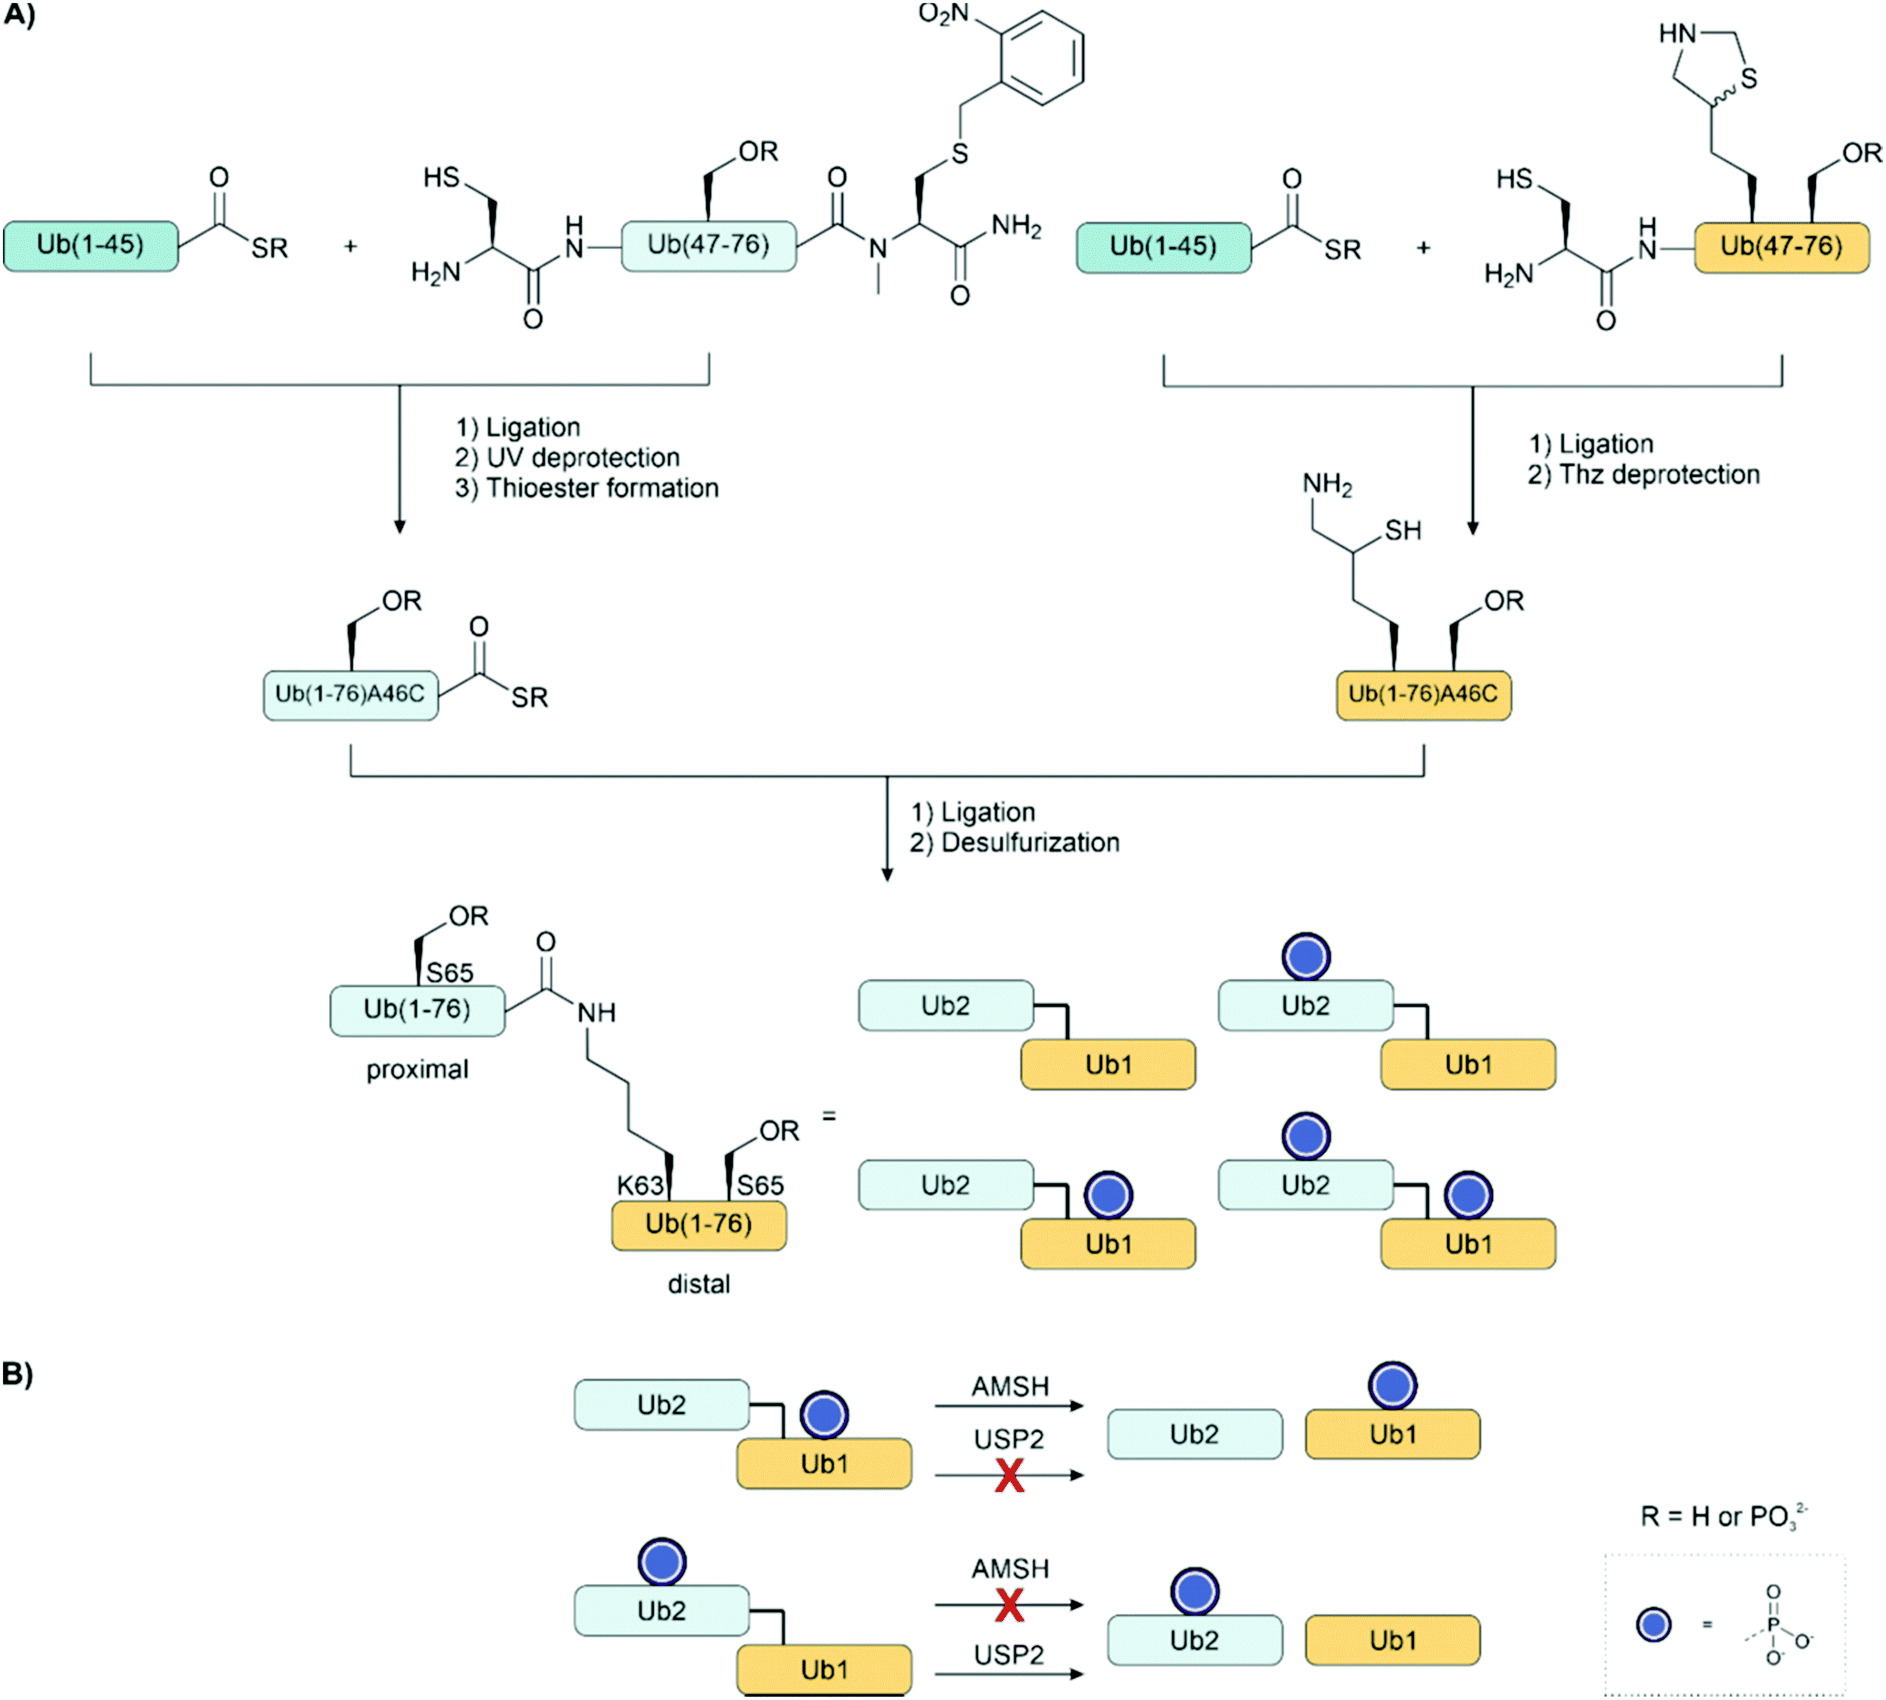 Dissecting the role of protein phosphorylation: a chemical biology toolbox  - Chemical Society Reviews (RSC Publishing) DOI:10.1039/D1CS00991E